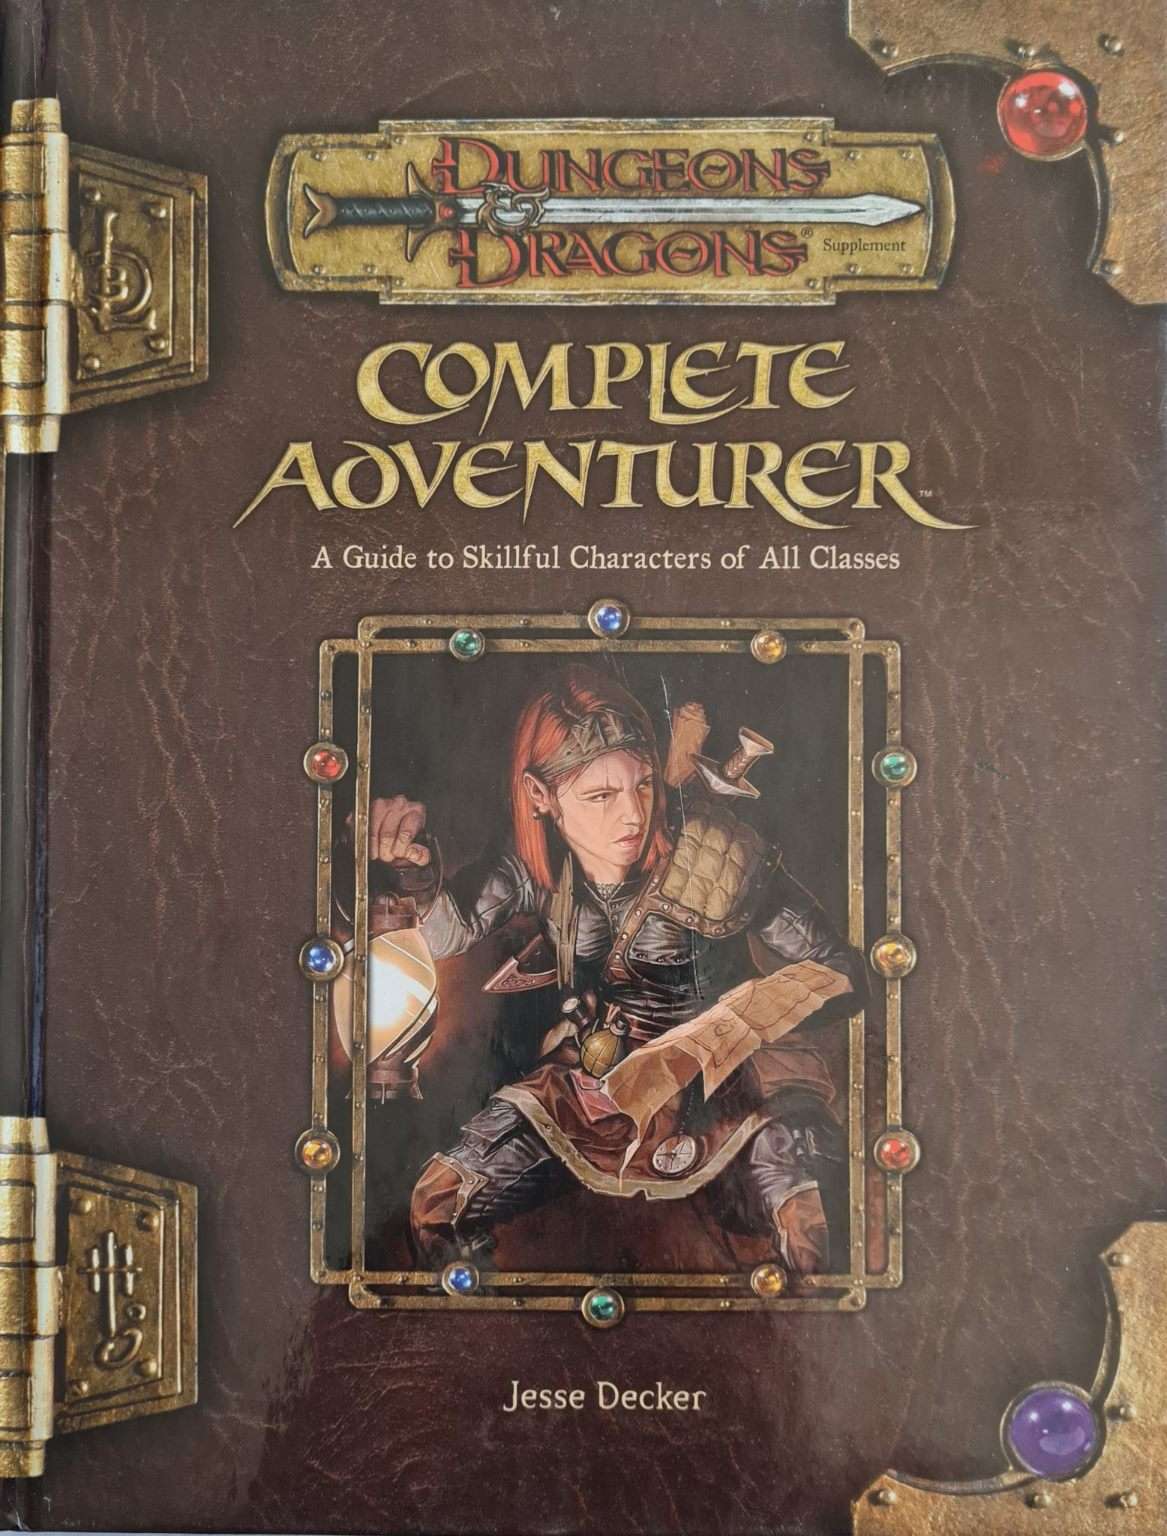 Dungeons and Dragons - Complete Adventurer 3.5 e